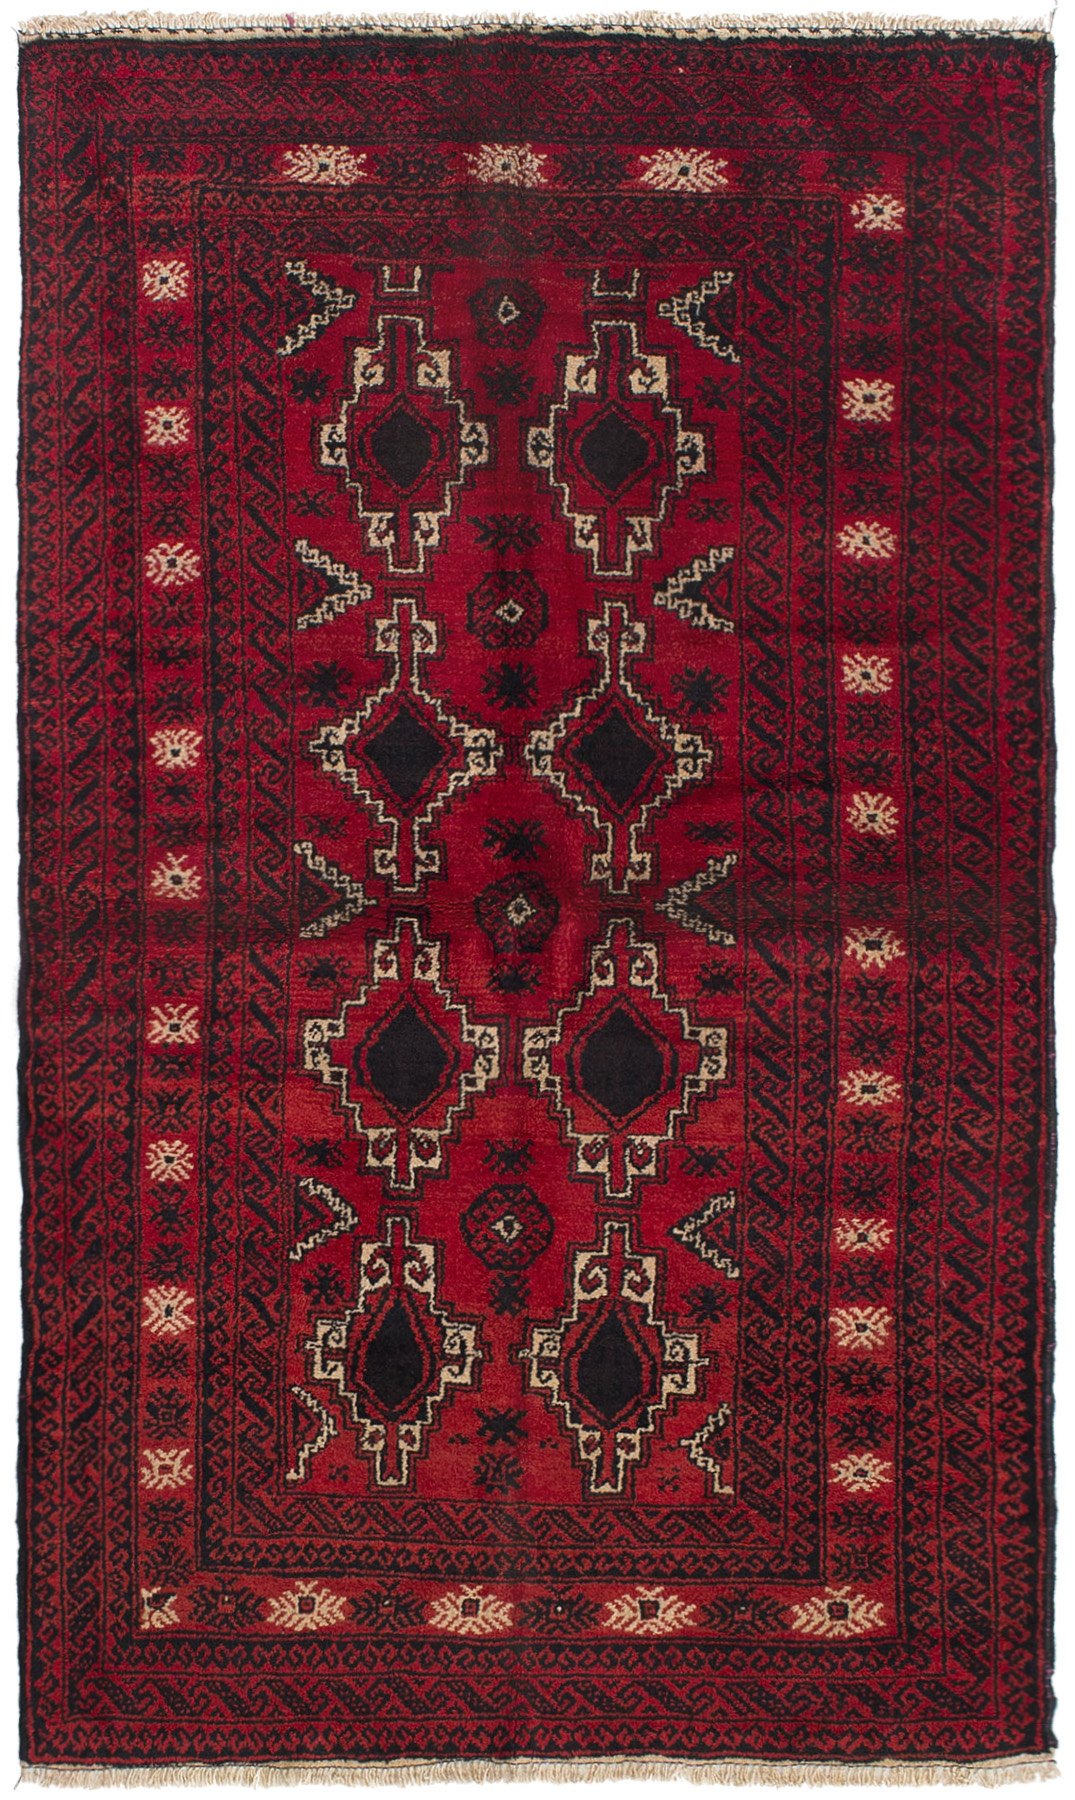 Hand-knotted Teimani Red Wool Rug 3'5" x 6'0"  Size: 3'5" x 6'0"  